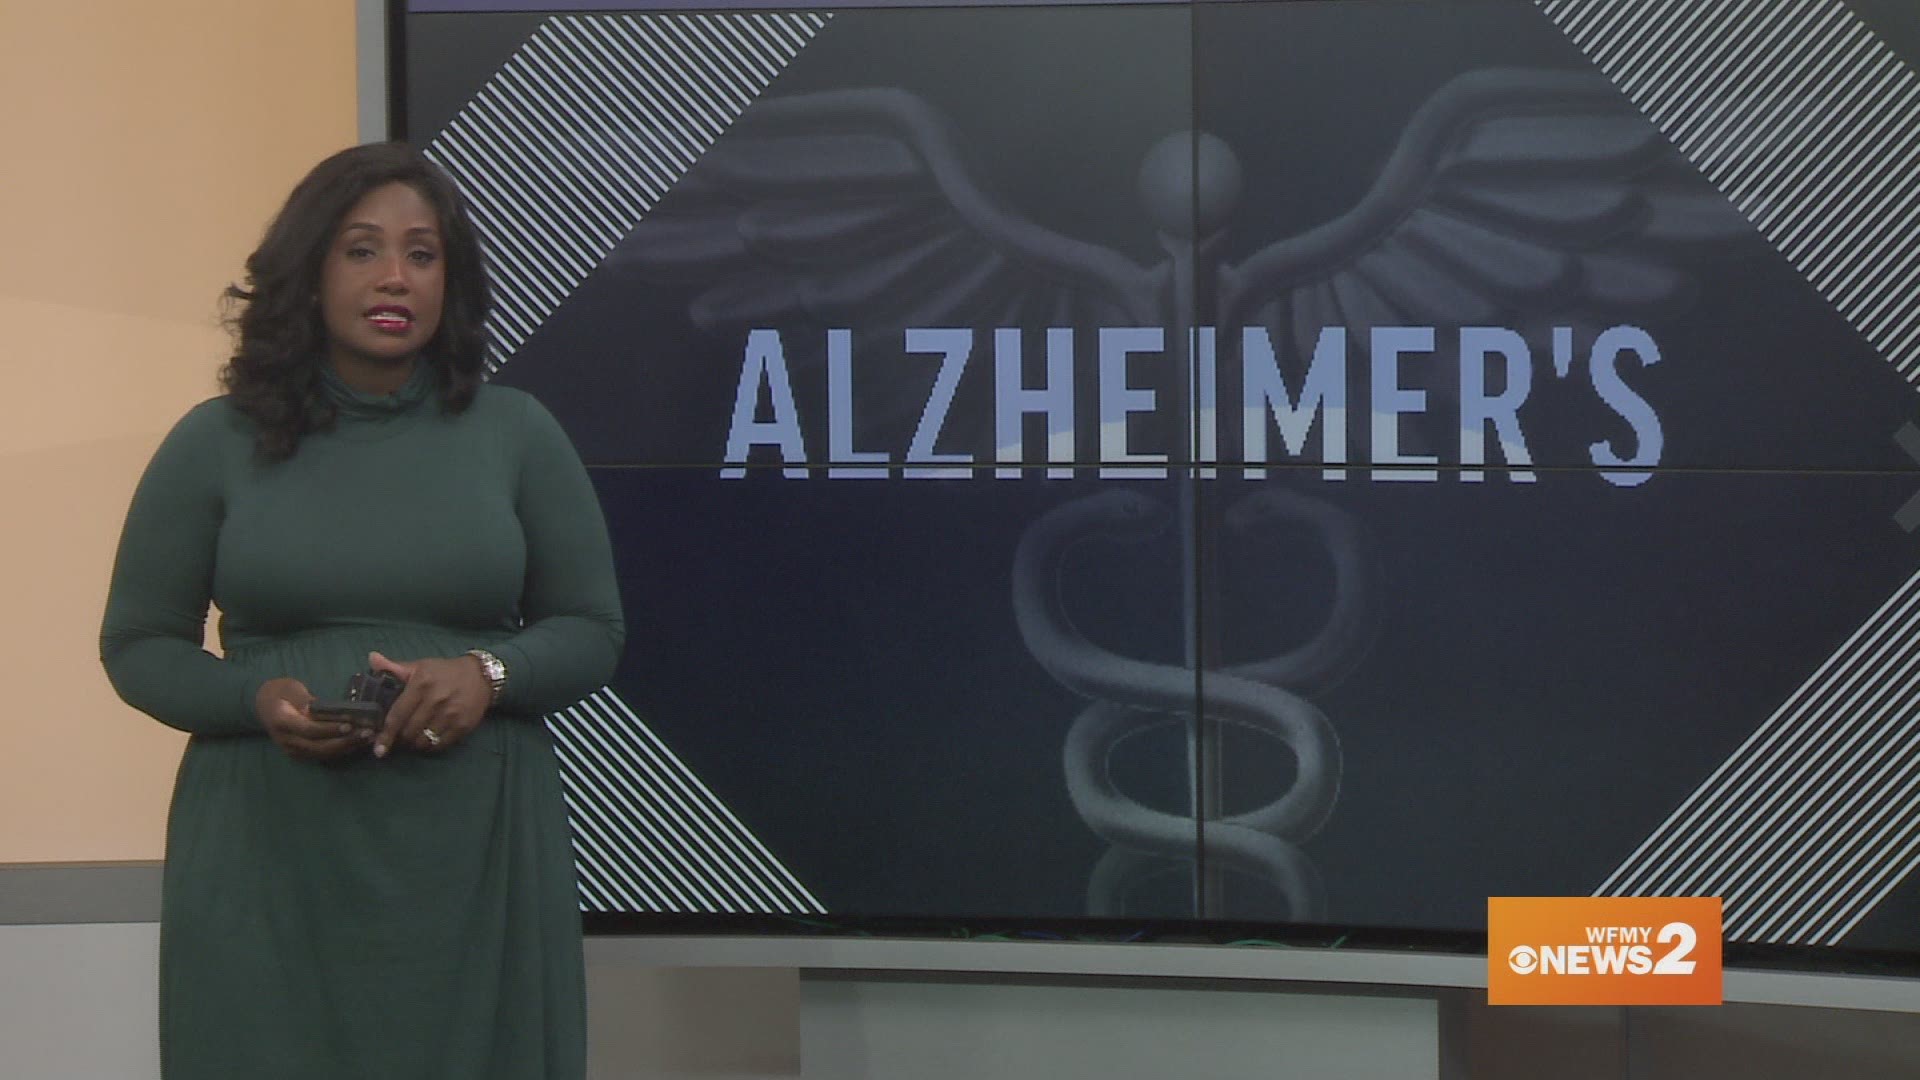 More than 16 million Americans are providing unpaid care for people with Alzheimer's or other dementias.